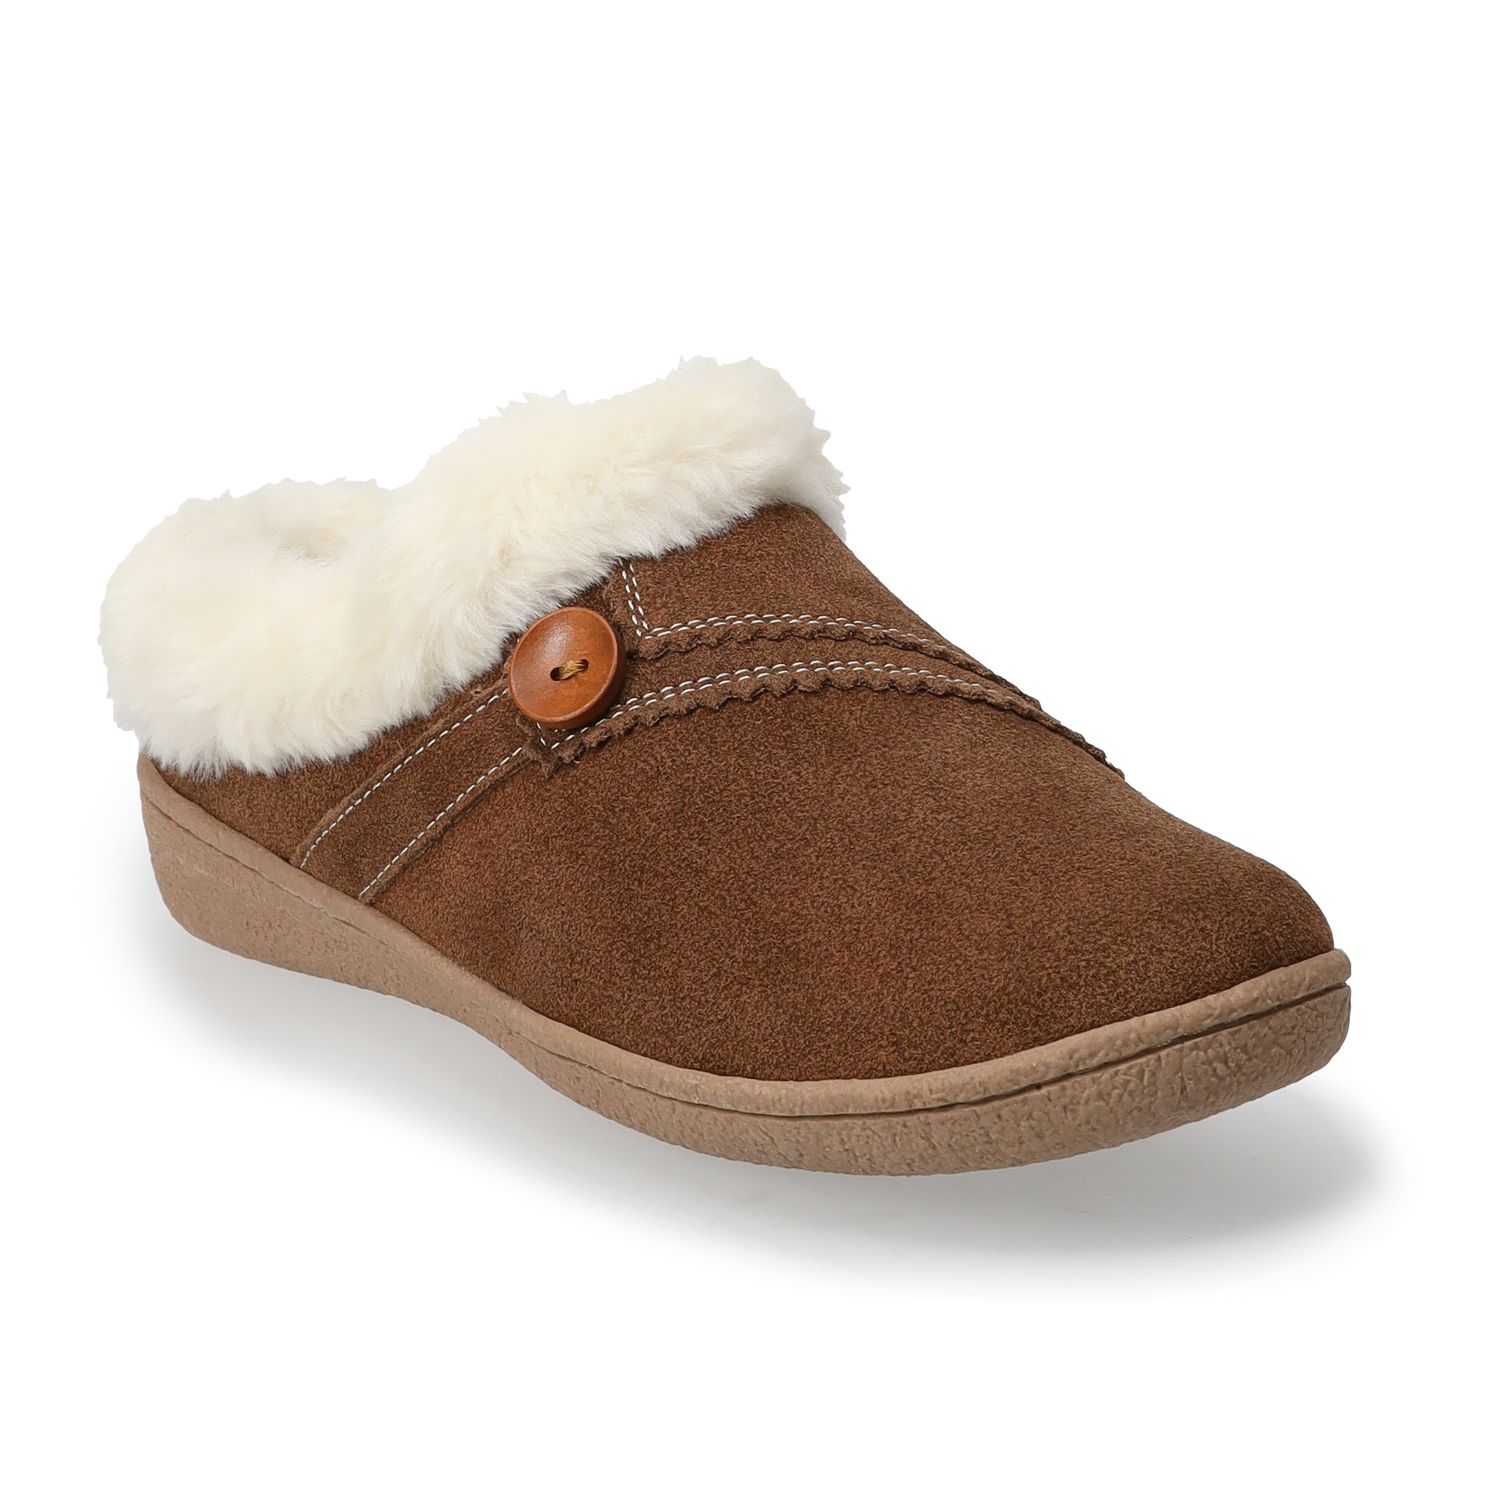 slippers from clarks